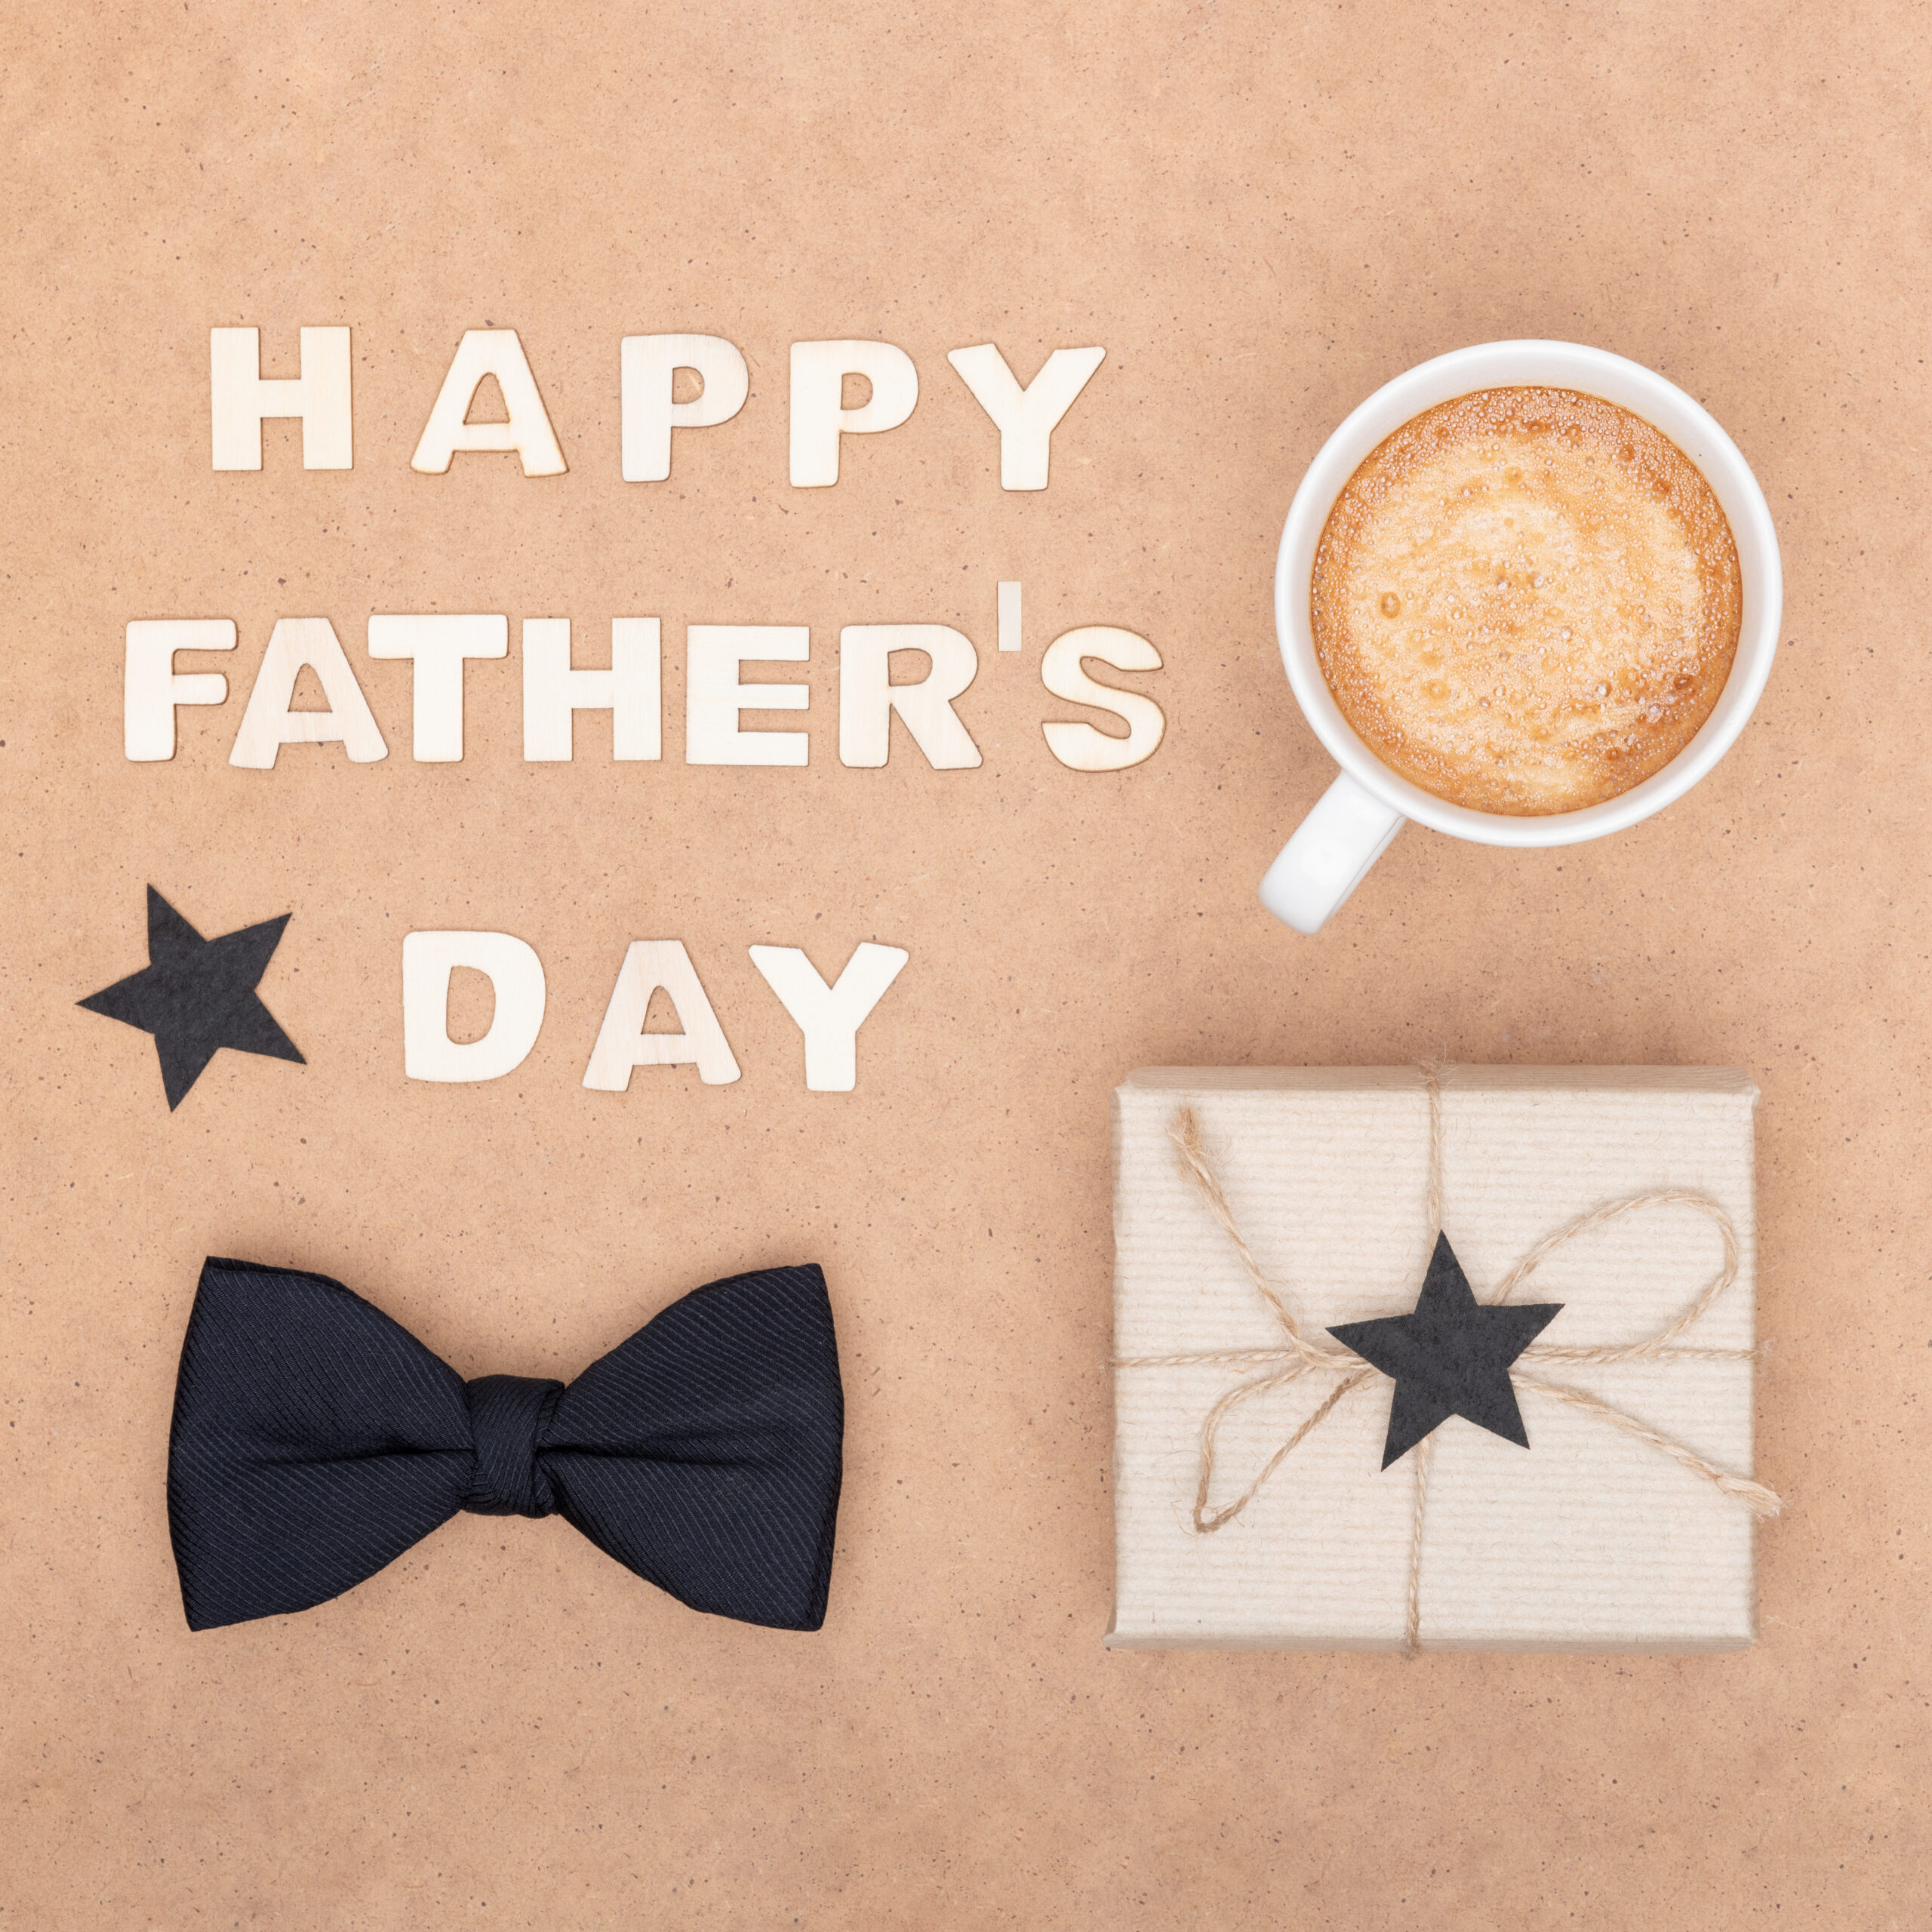 Happy Father's Day Background. Cup of coffee, beautiful present and black bow tie on brown background flat lay. Fathers day still life setup.